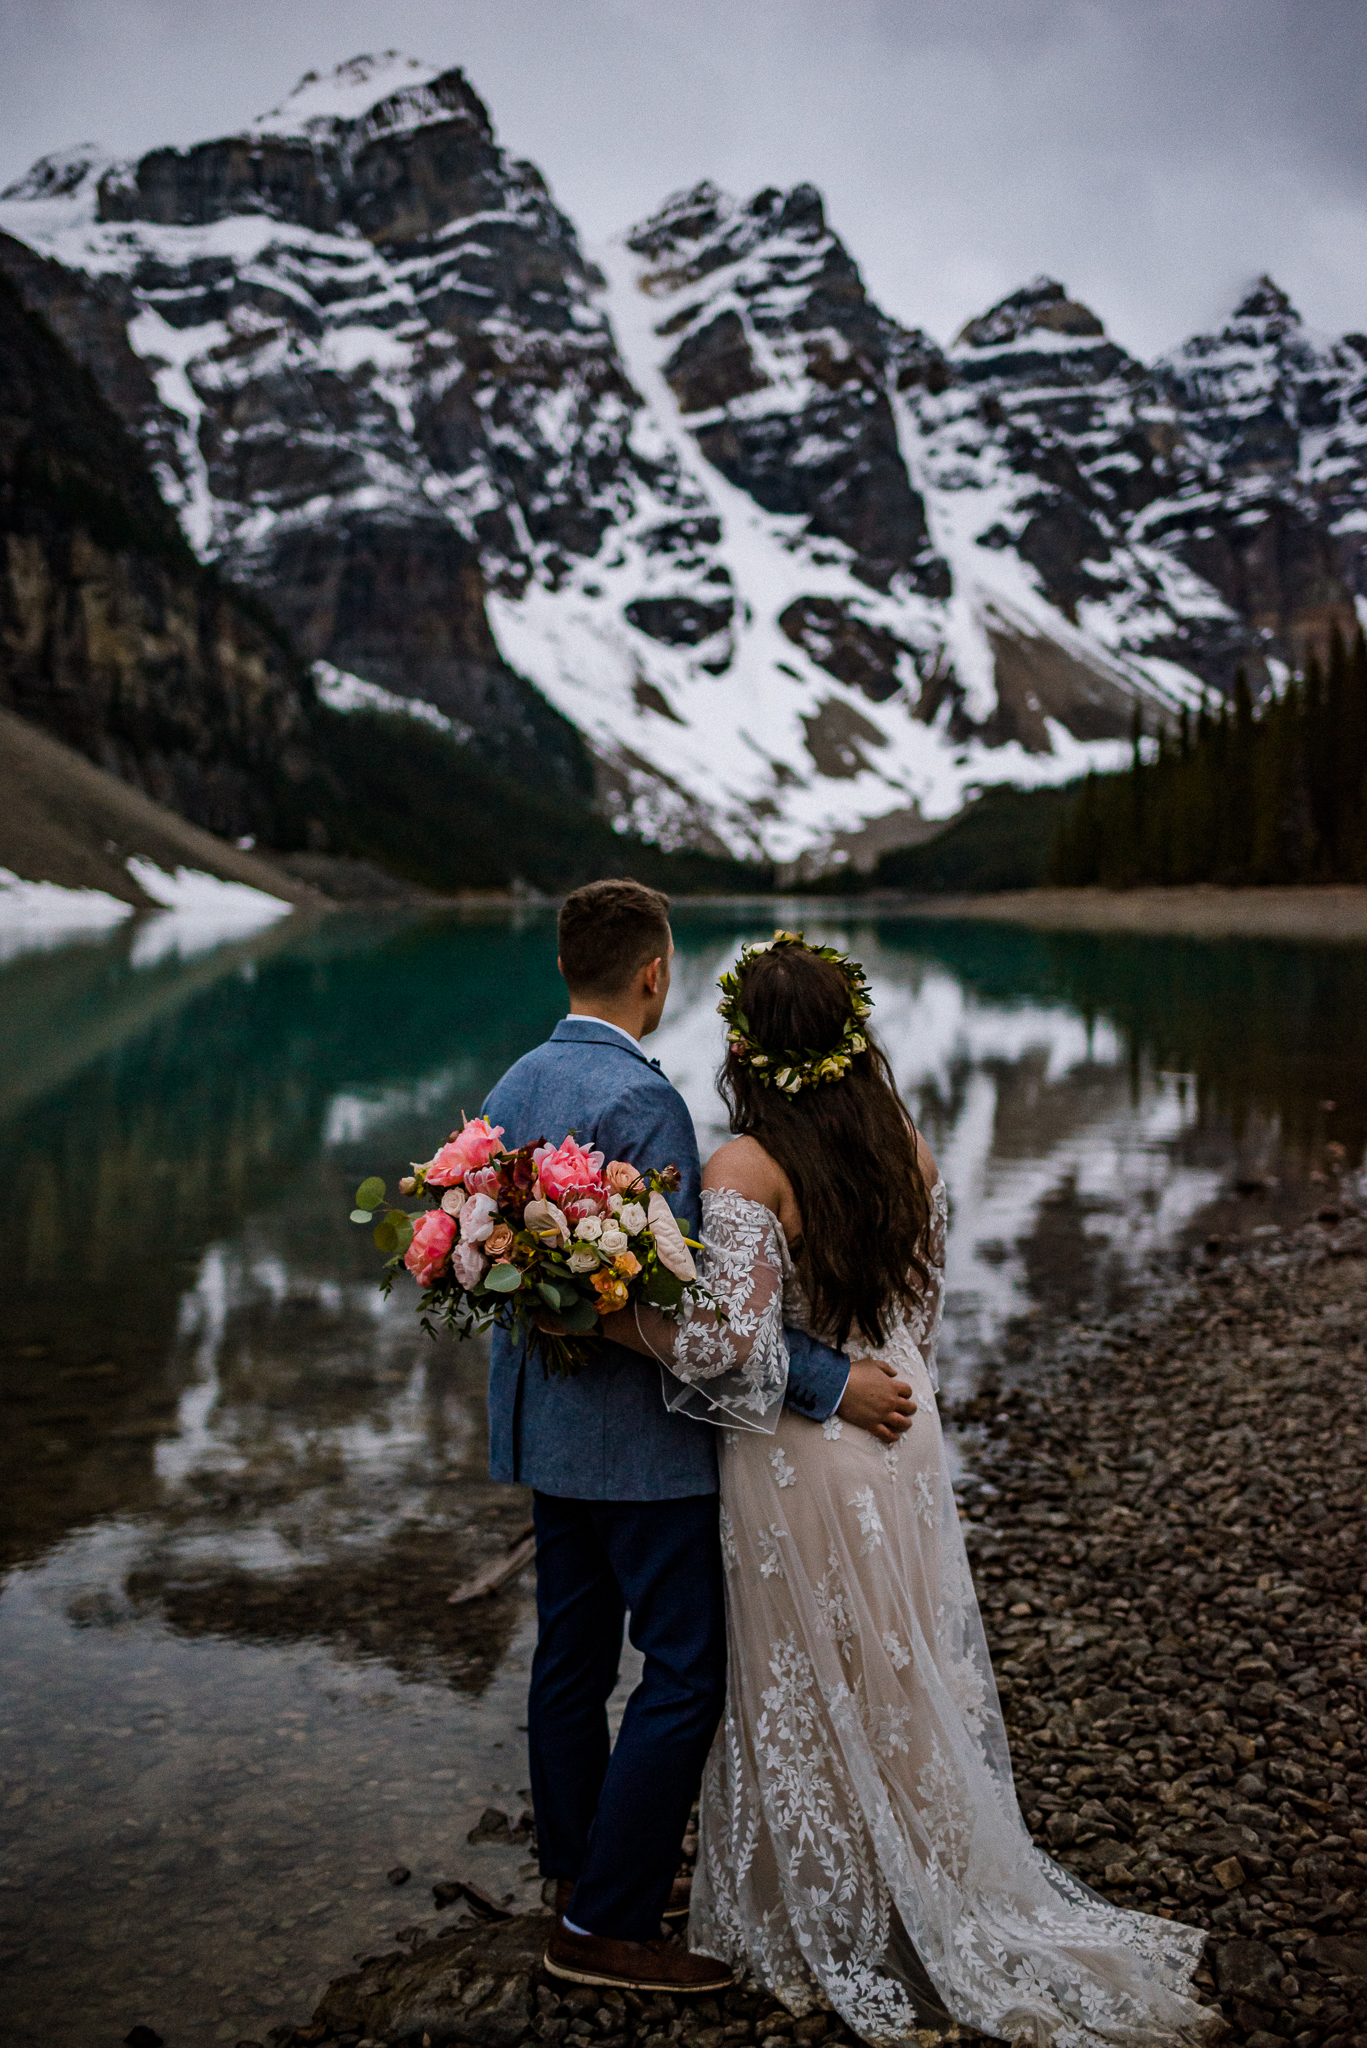 Groom holding his bride while she holds bouquet at Moraine Lake, Alberta